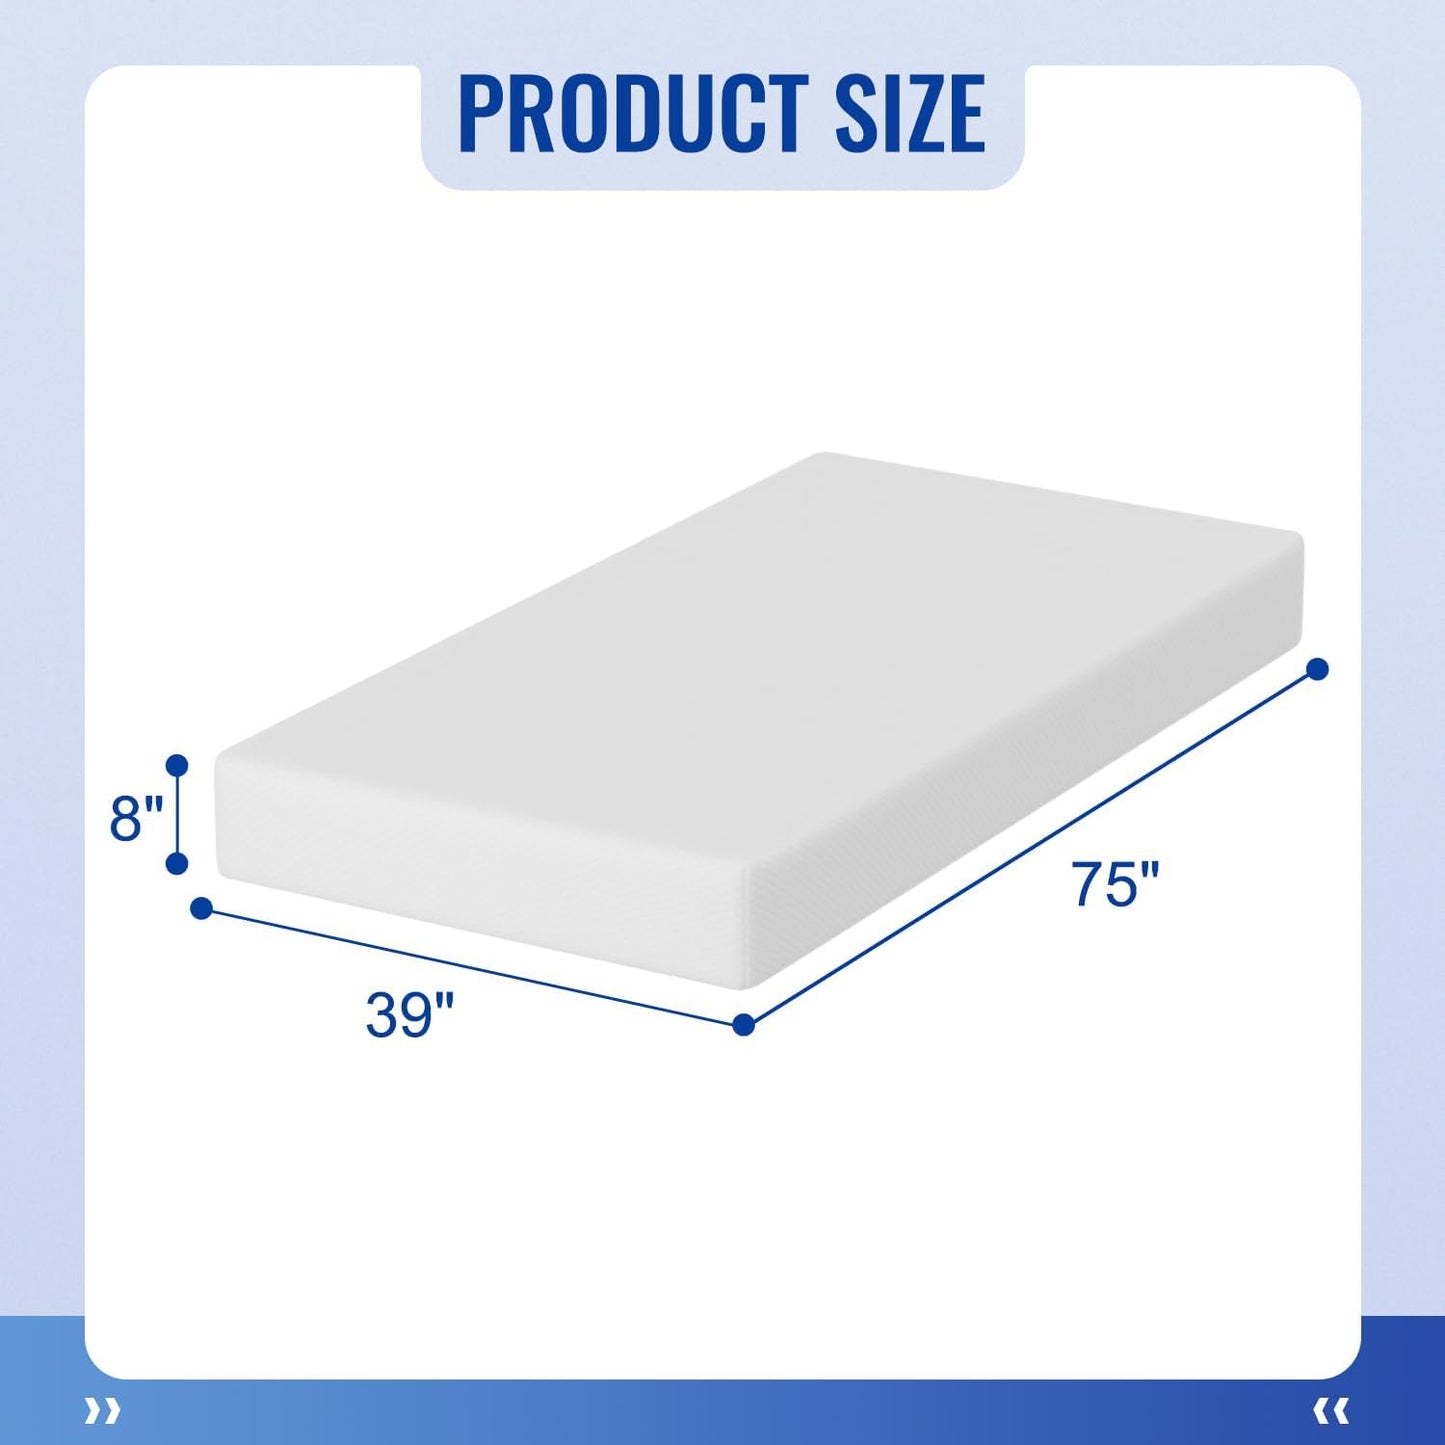 NEW - FDW 8 inch TWIN Mattress Gel Memory Foam Mattress for Cool Sleep & Pressure Relief, Medium Firm Mattresses CertiPUR-US Certified/Bed-in-a-Box/Pressure Relieving (8 in, Twin) - Retail $99